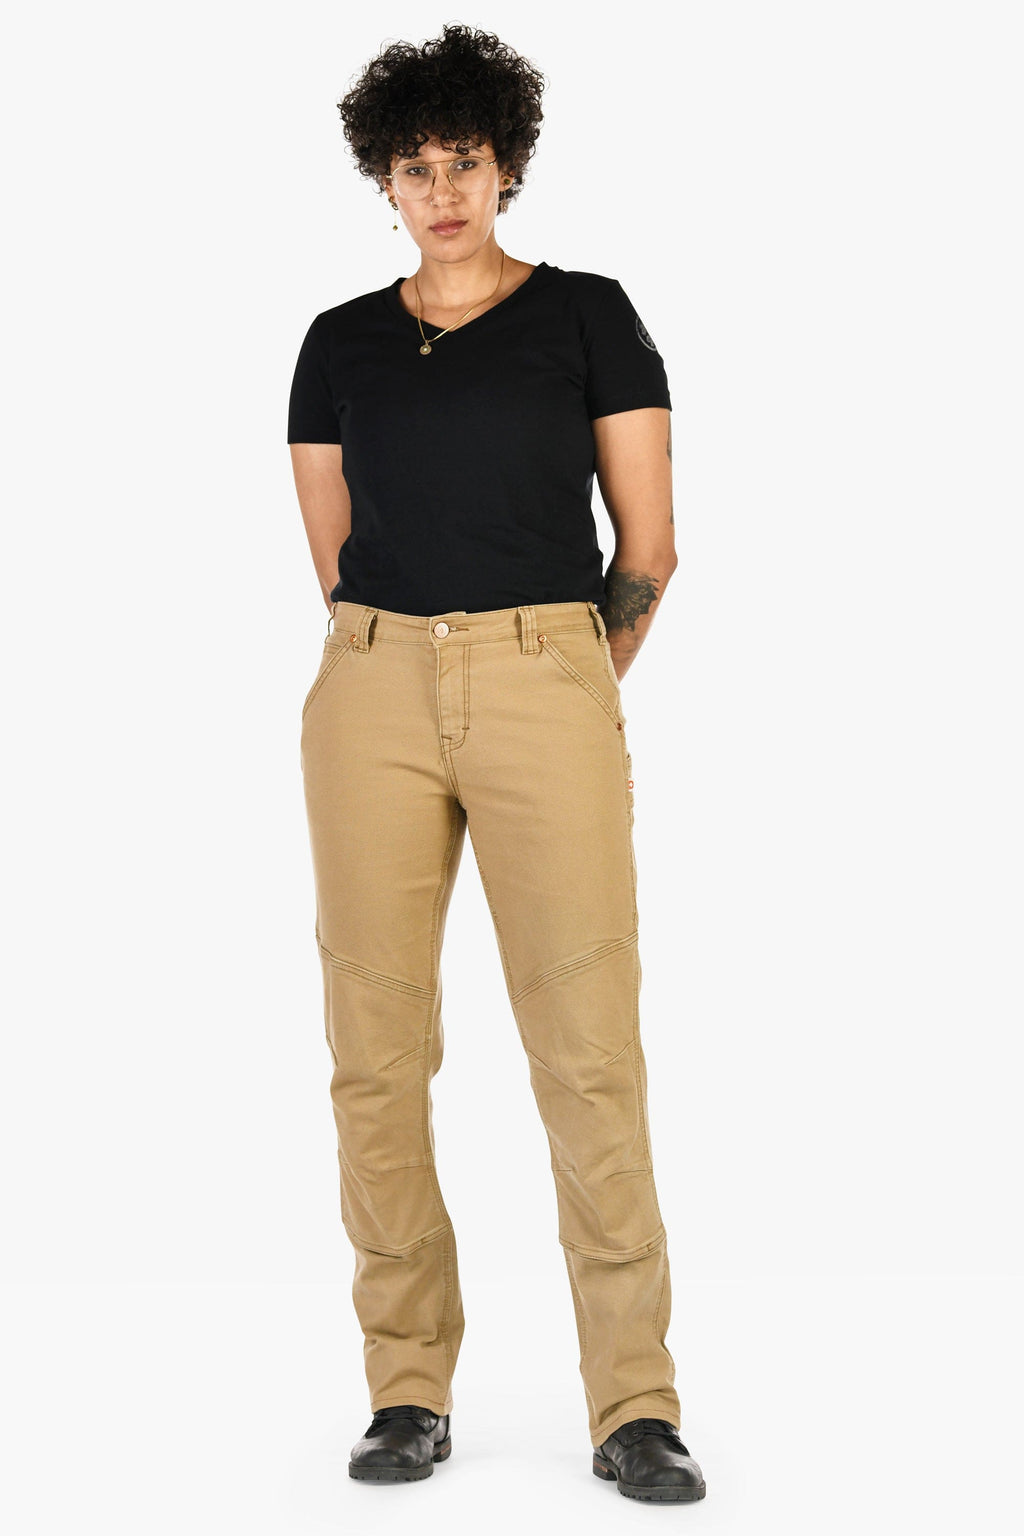 GO TO™ Stretch Canvas Pants in Sawdust Brown Work Pants Dovetail Workwear